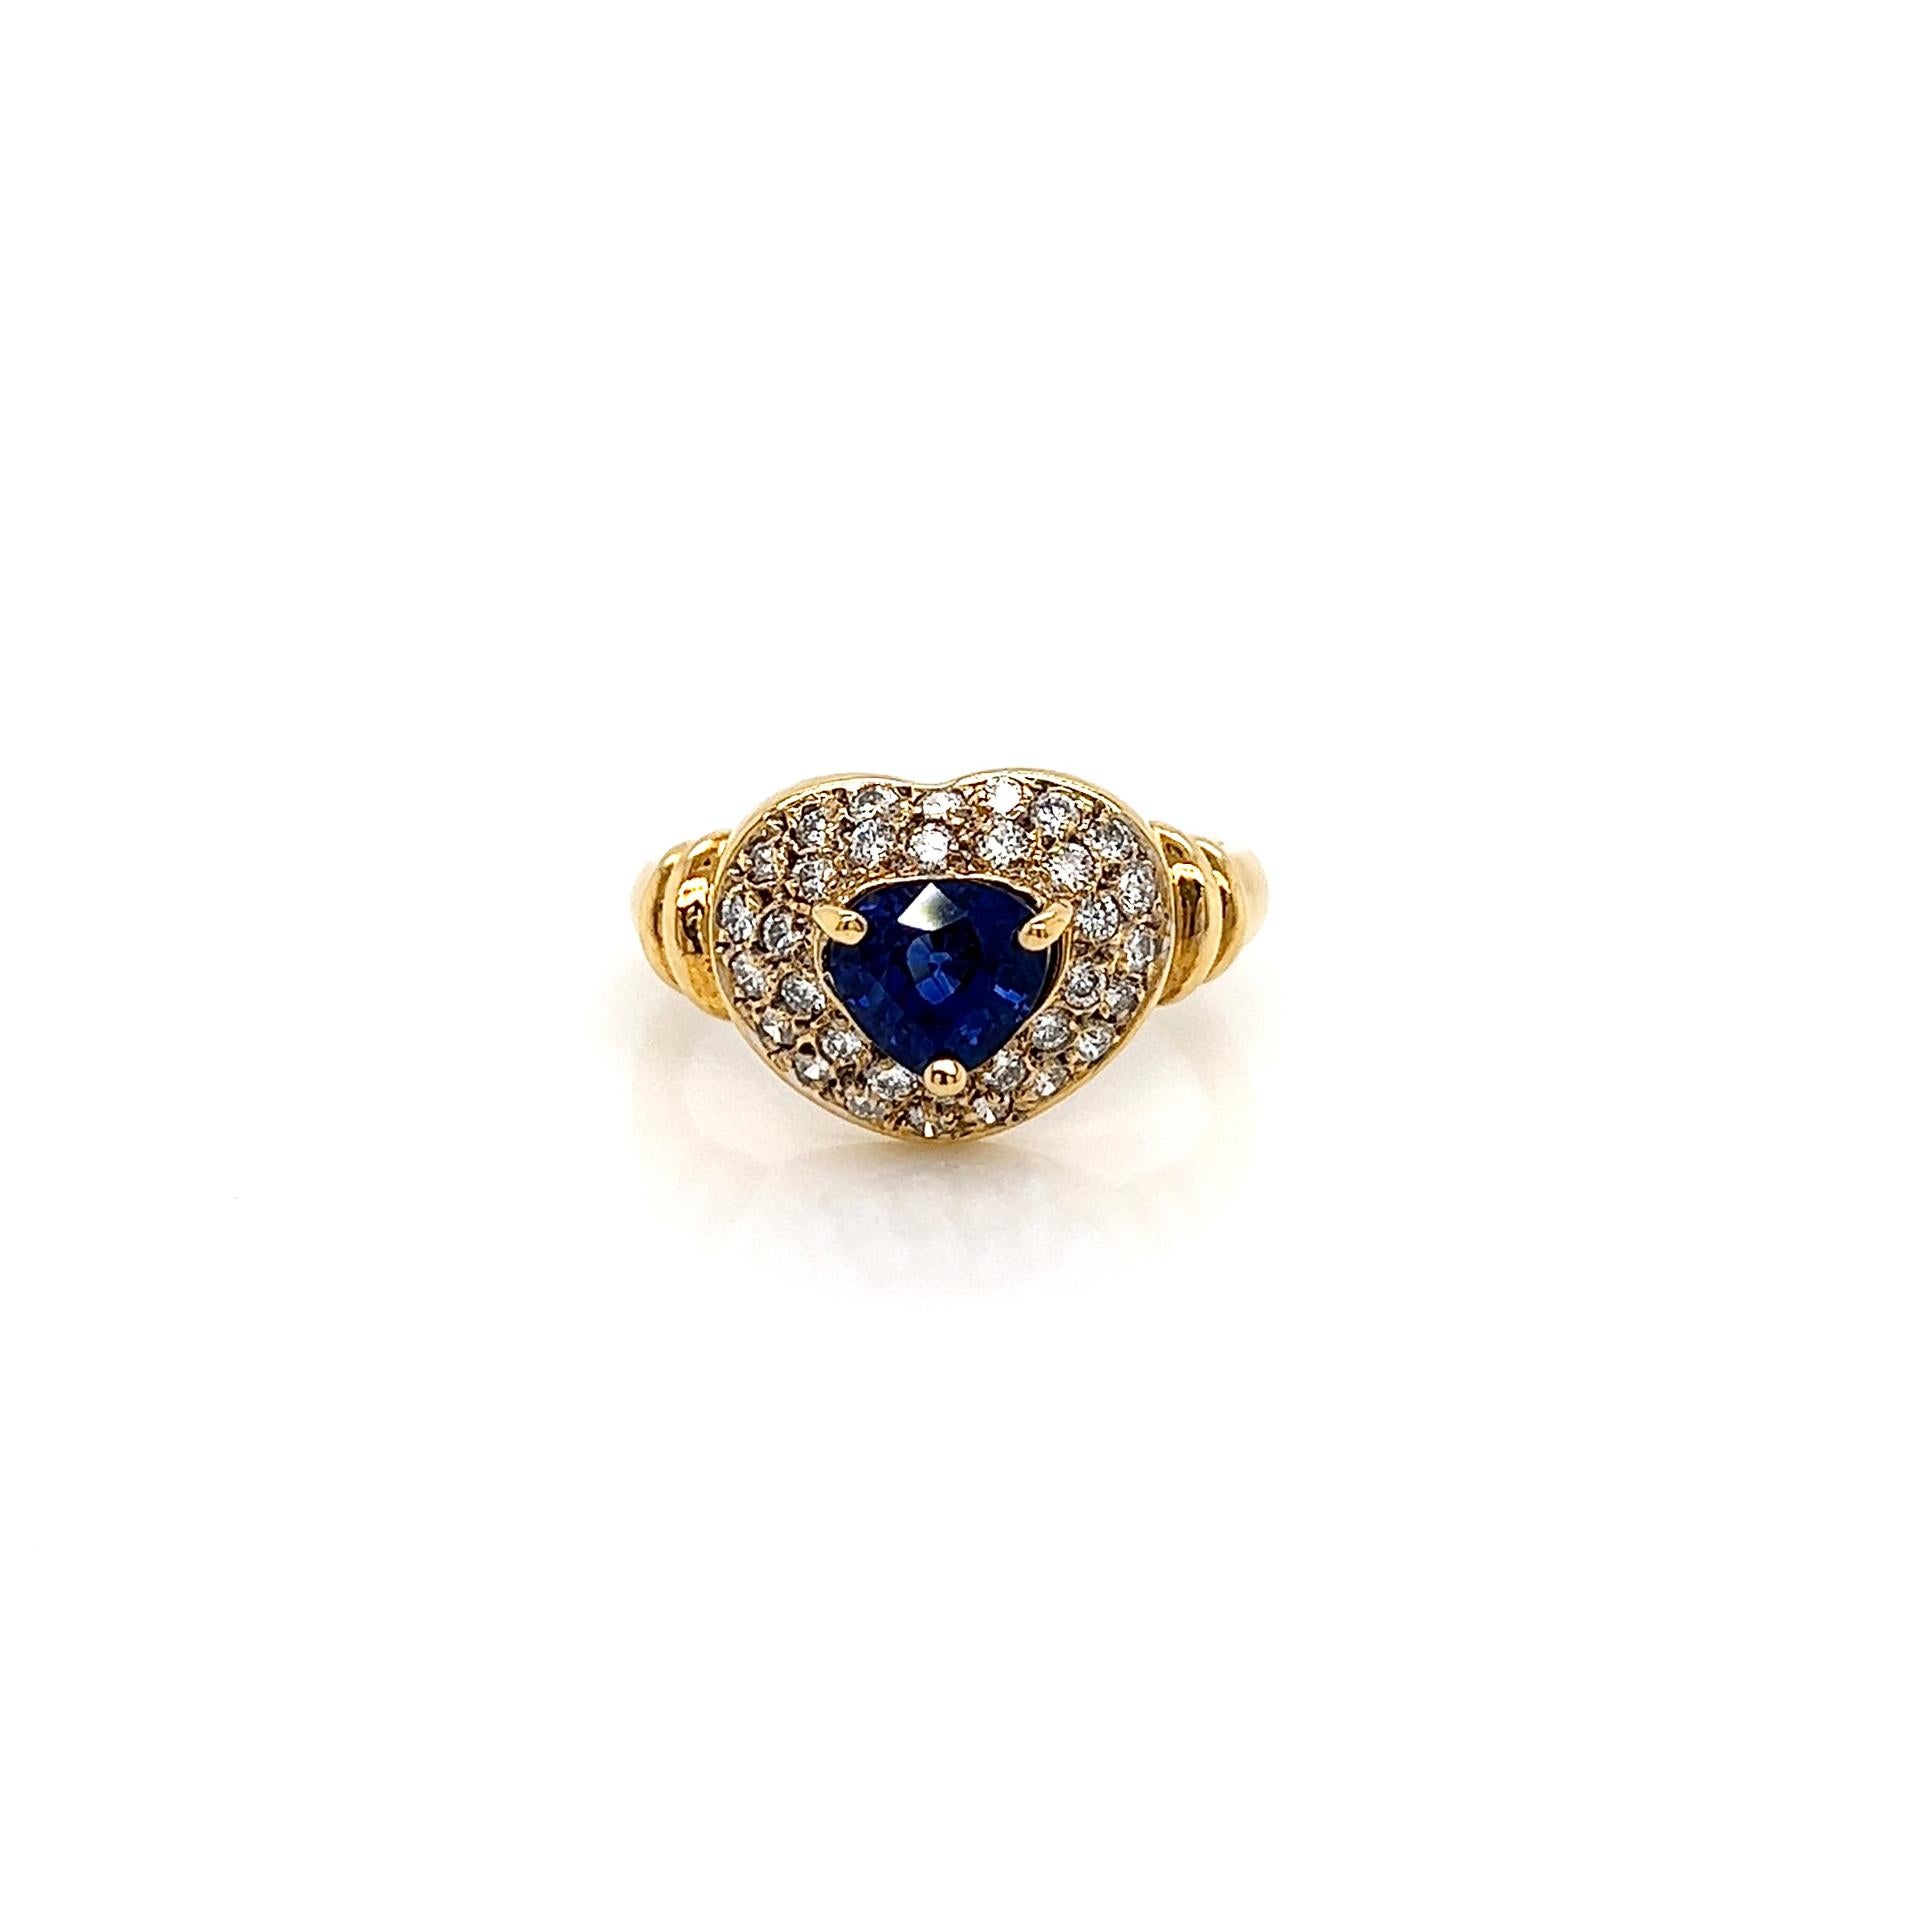 2.10 Total Carat Sapphire Diamond Ladies Ring

-Metal Type: 18K Yellow Gold
-1.30 Carat Heart Cut Blue Sapphire
-0.80 Carat Round Side Natural Diamonds
-Size 7.0

Resize is available. Just contact us before ordering, the price may vary from size to